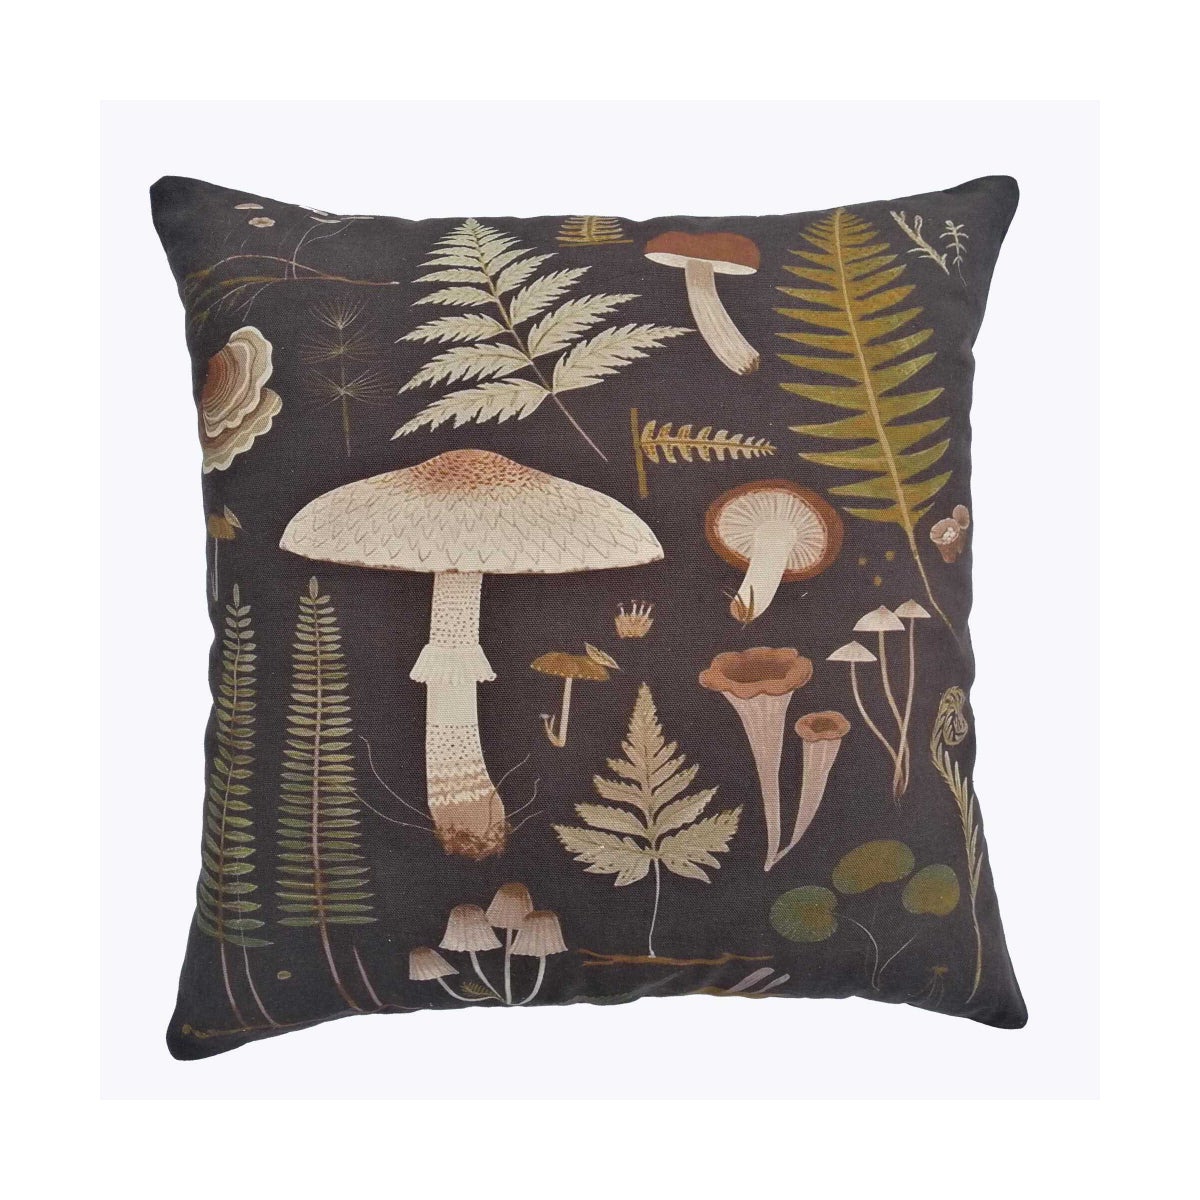 Cotton Square Pillow with Mushroom Pattern